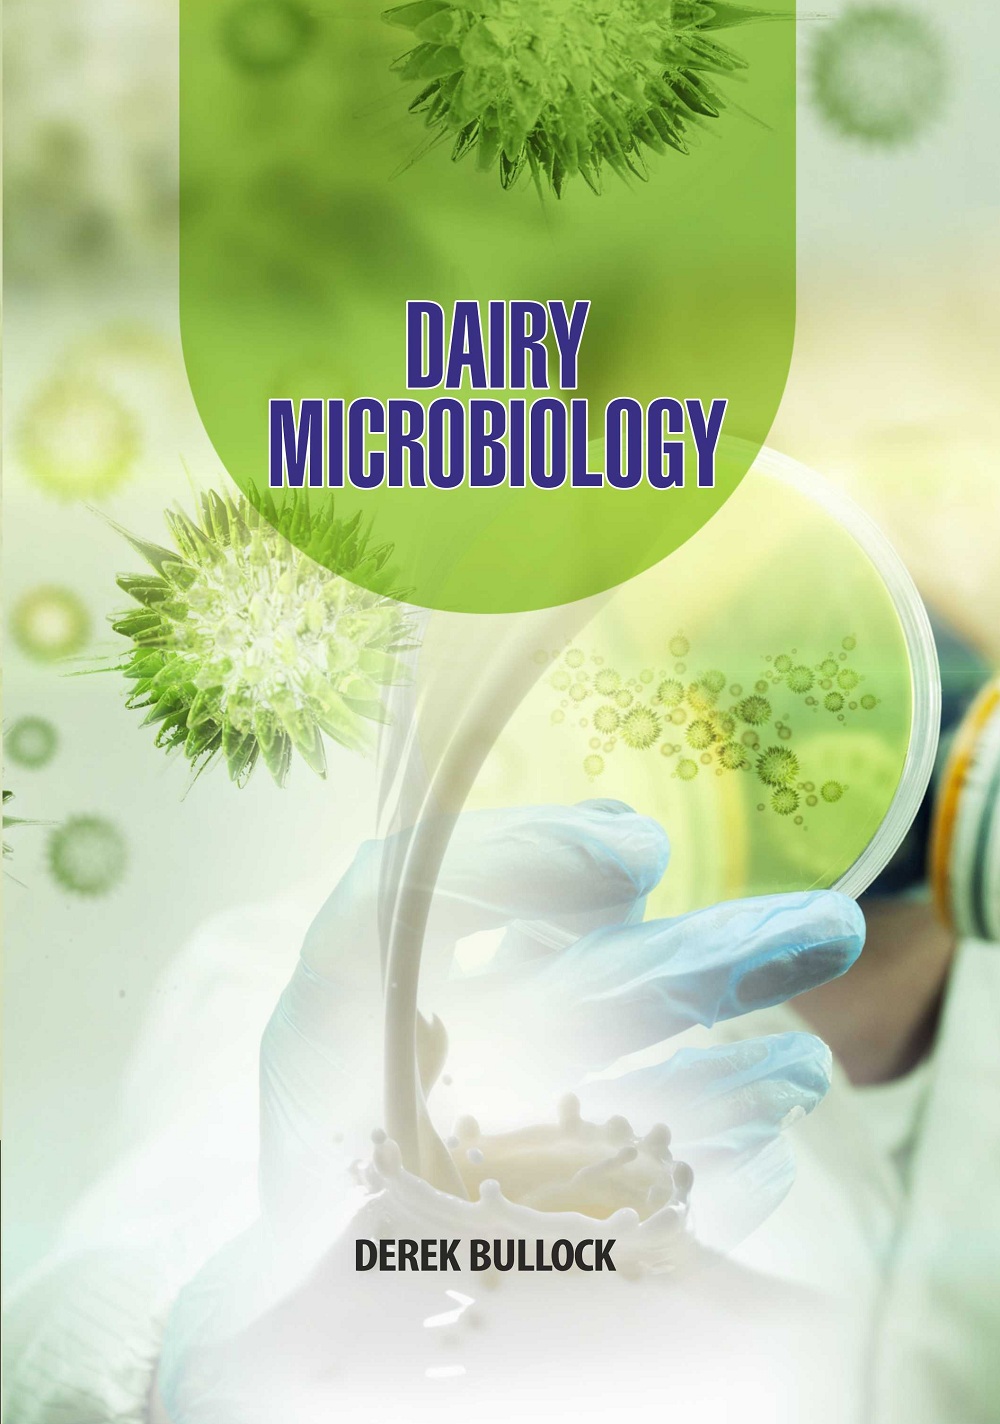 Dairy Microbiology